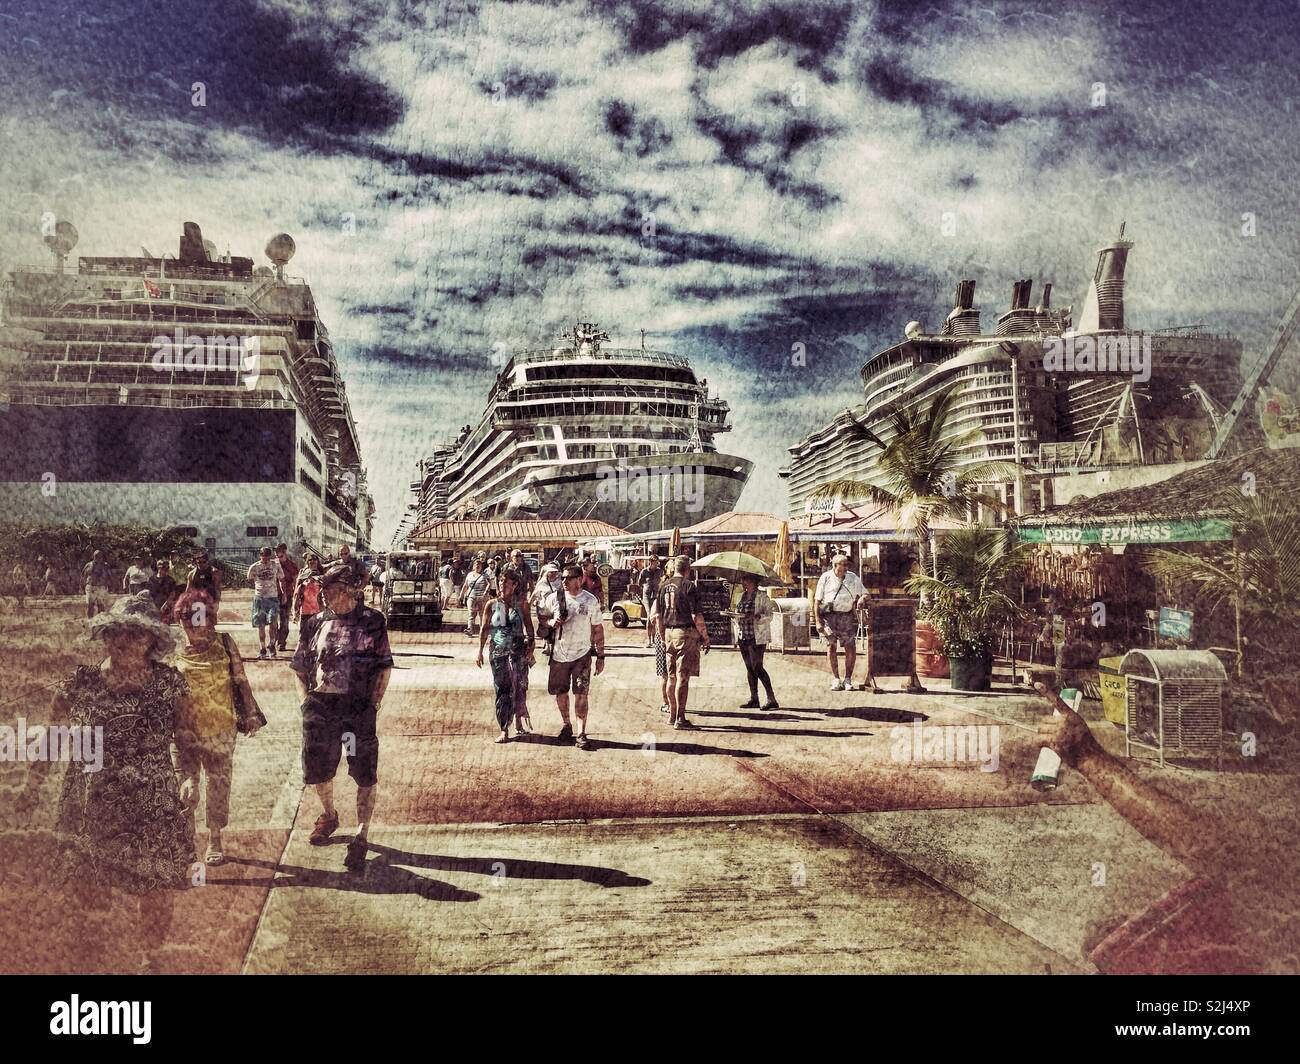 Grunge Filter of Passengers of Several Huge Cruise Ships docked at Philipsburg, St Maarten in the Caribbean. December 2016 Stock Photo